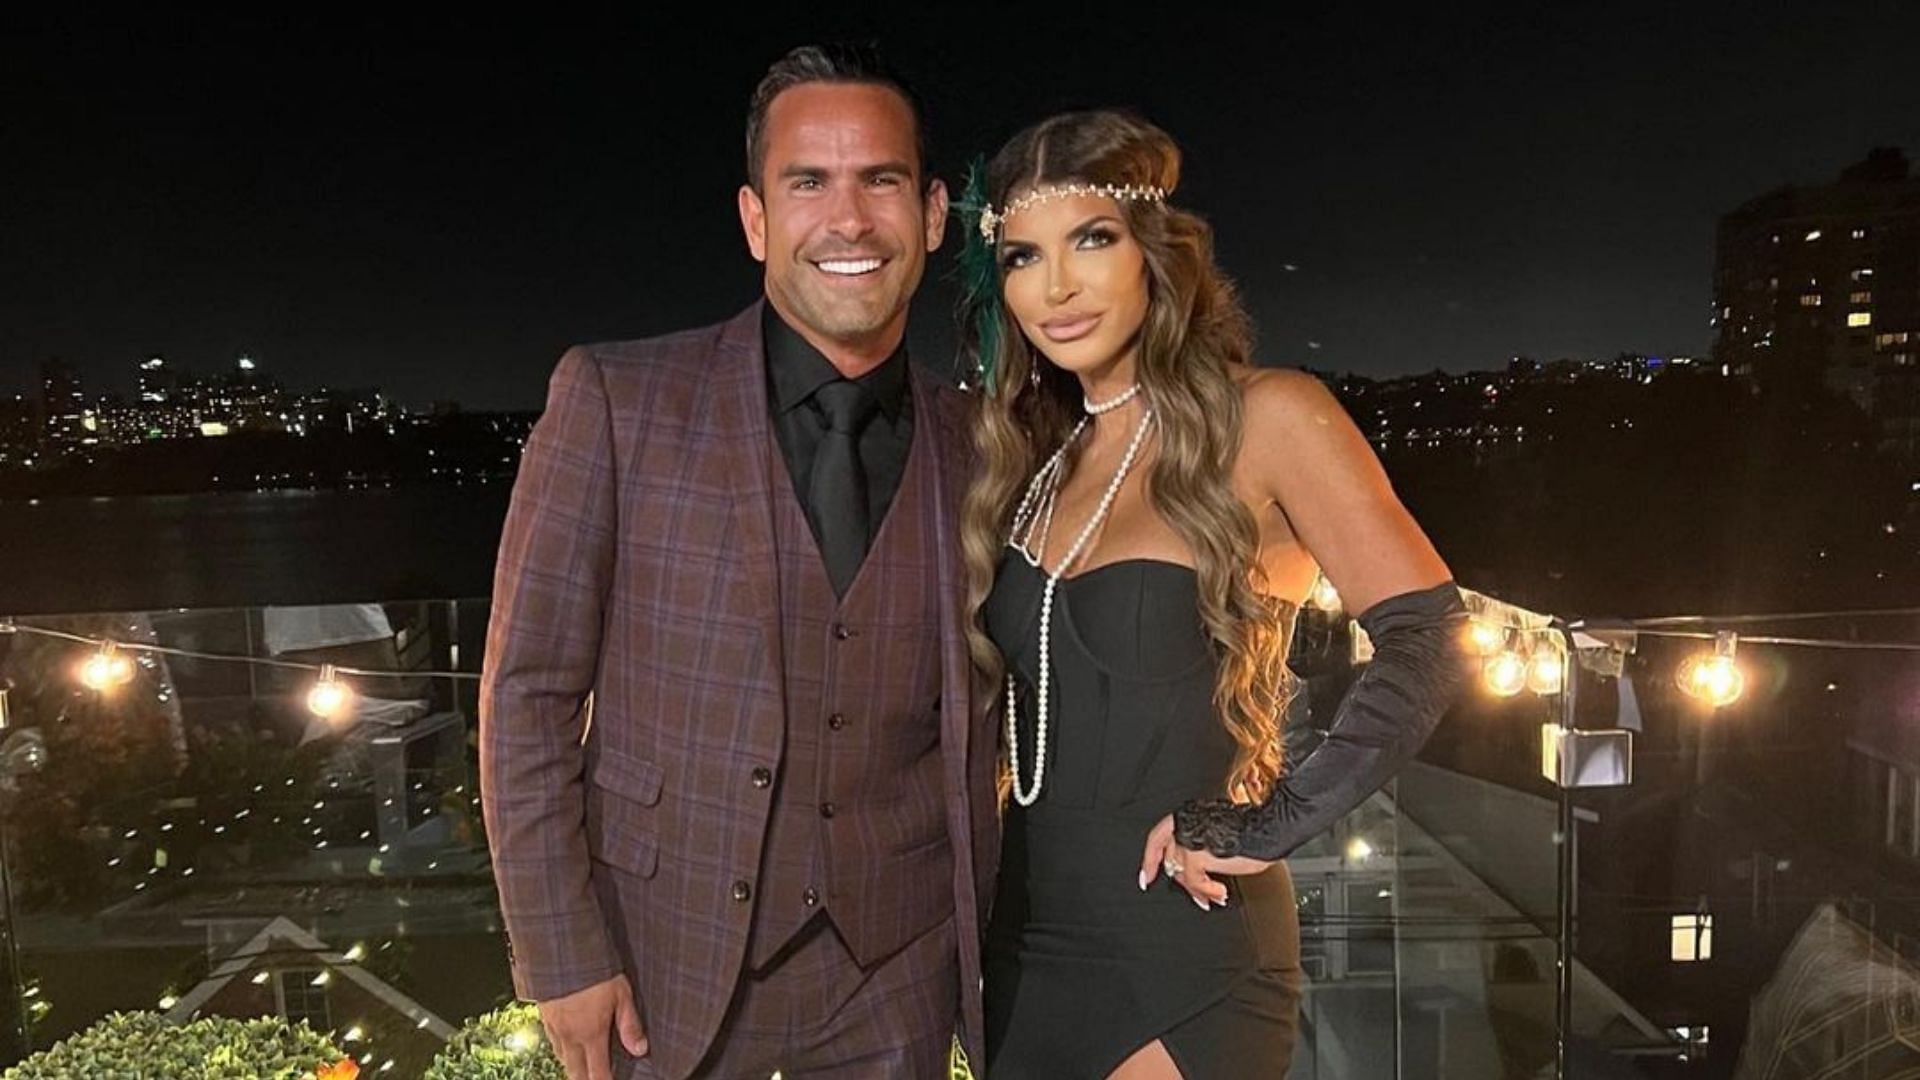 RHONJ couple Teresa and Louie address private investigator claims on WWHL